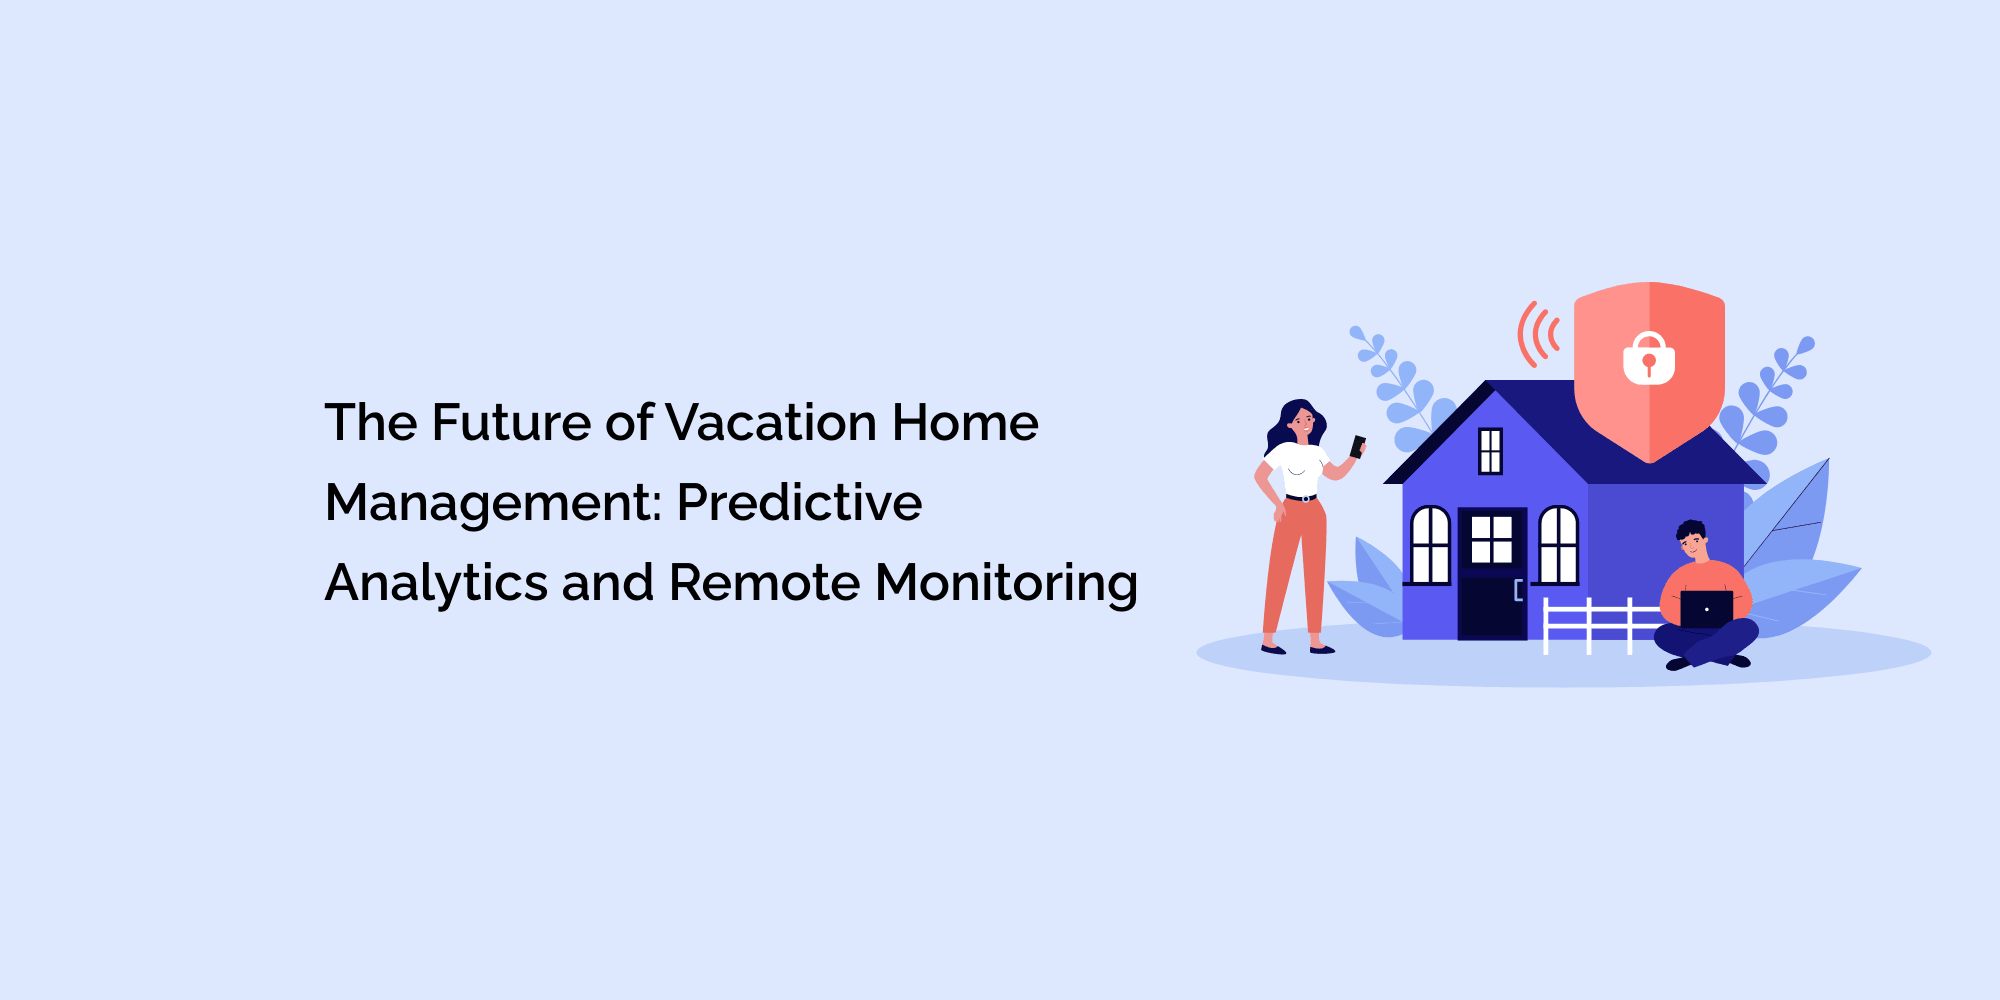 The Future of Vacation Home Management: Predictive Analytics and Remote Monitoring